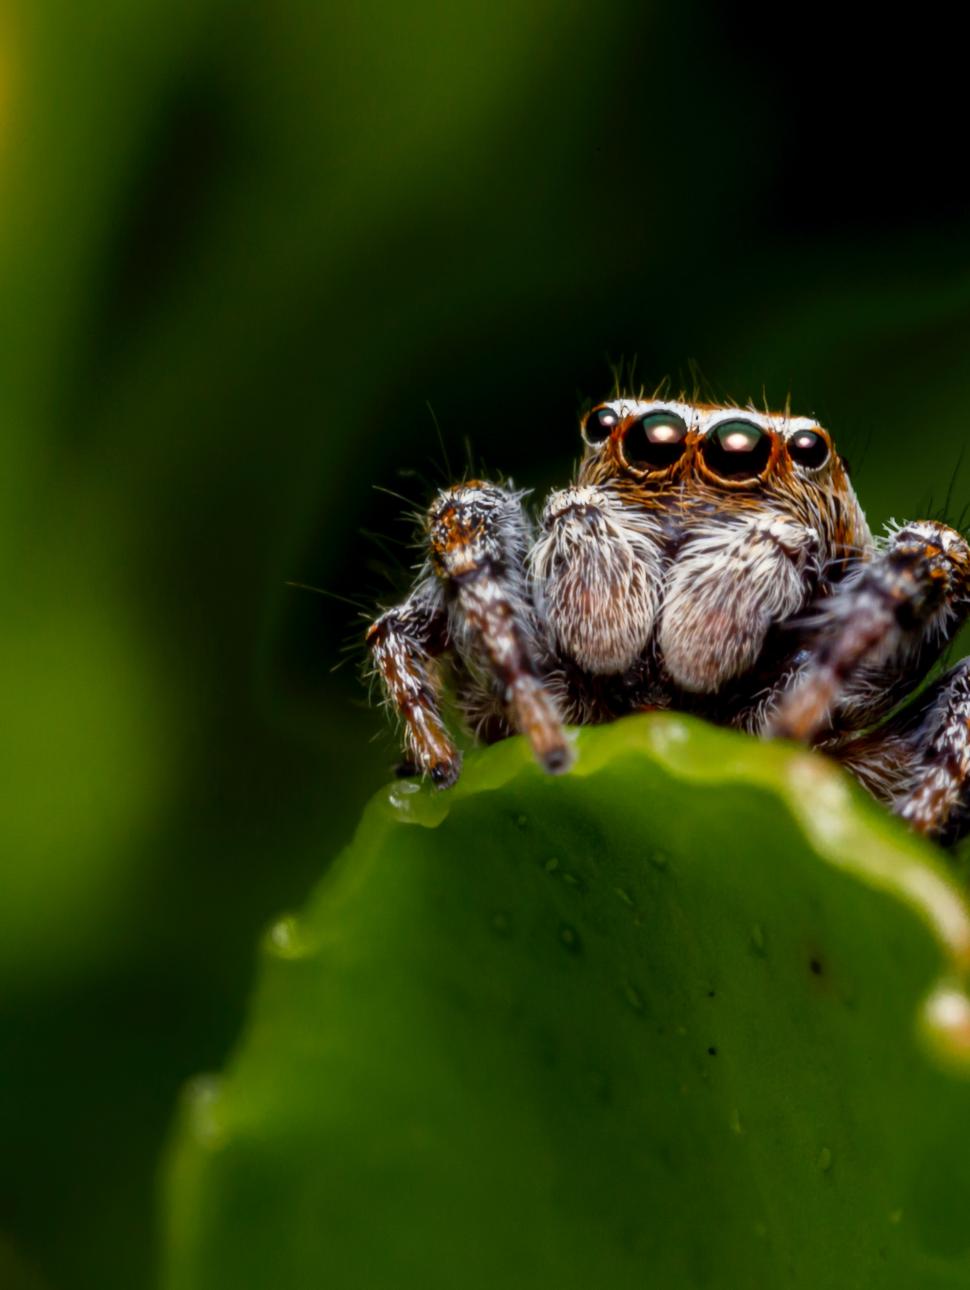 An image of a close-up spider resting on a leaf. 